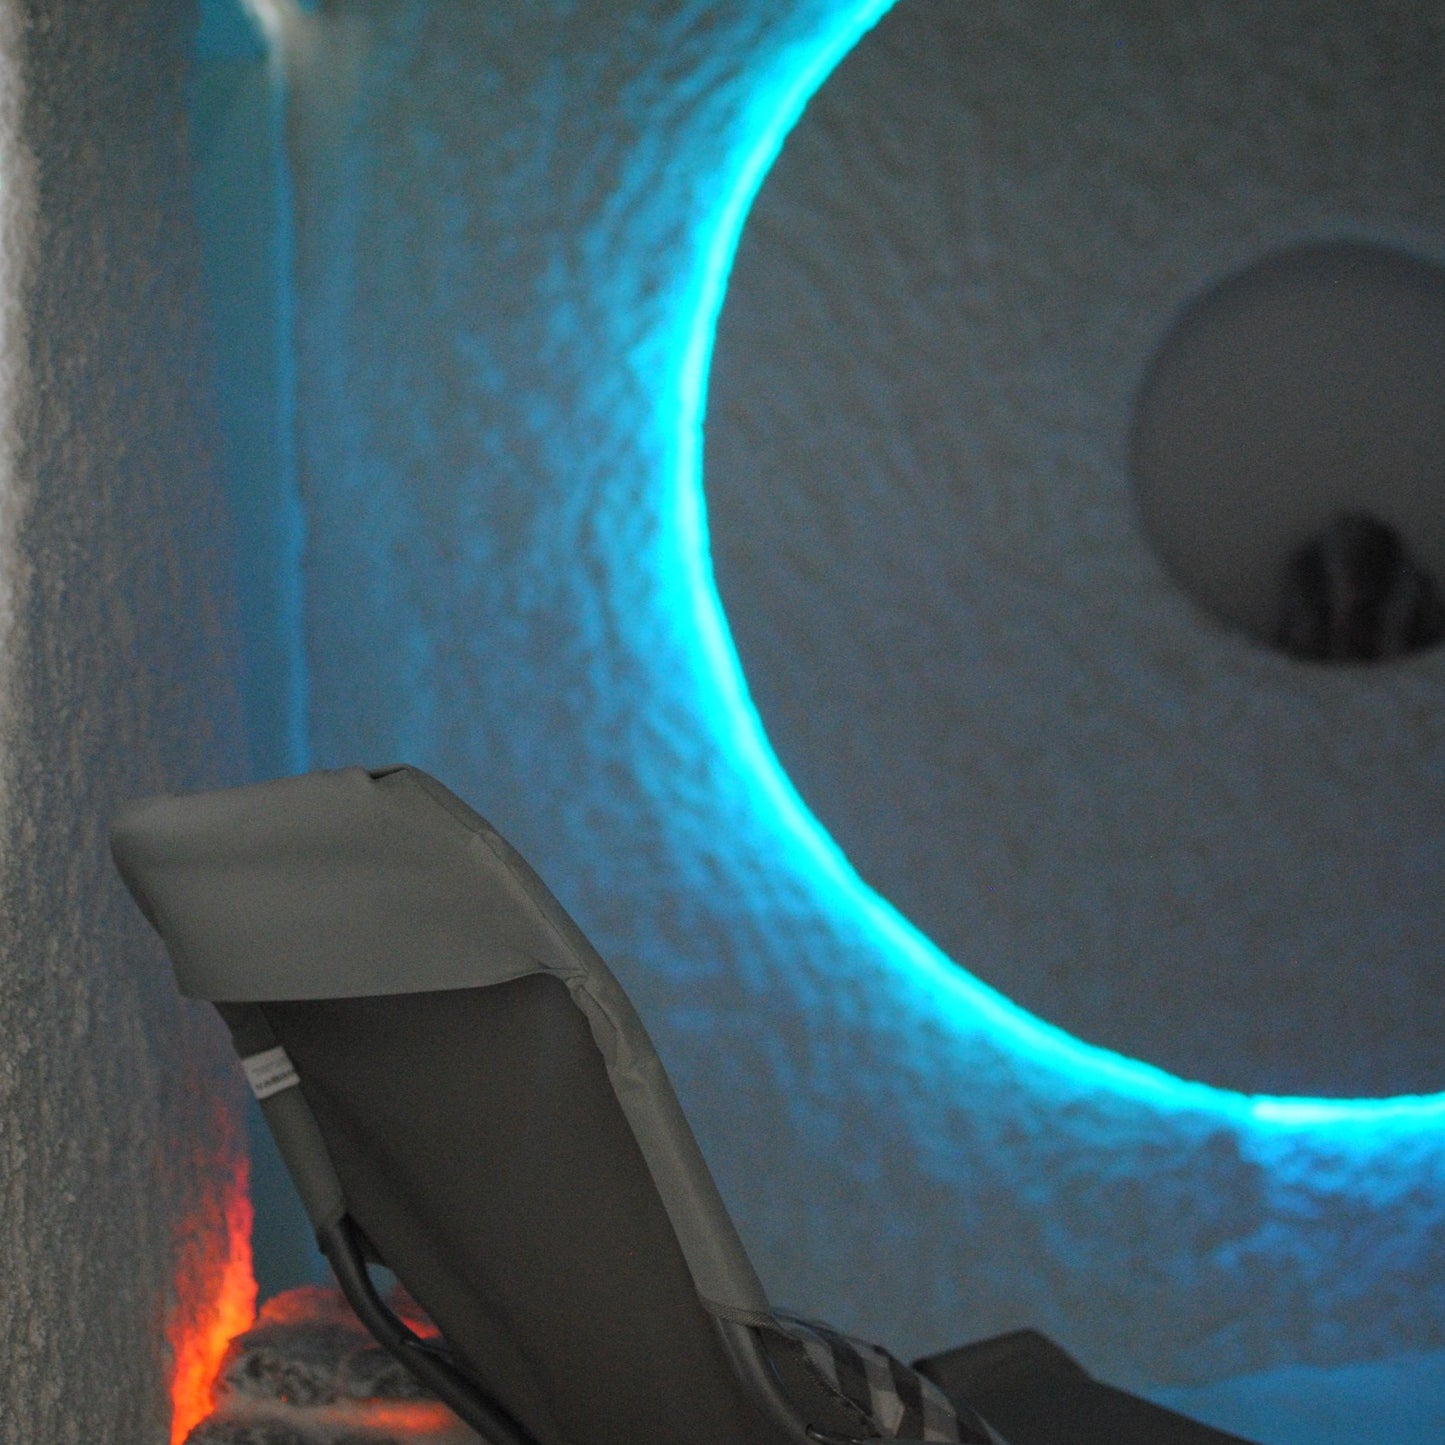 Flotation and Massage in a Salt Cave for Holistic Relaxation